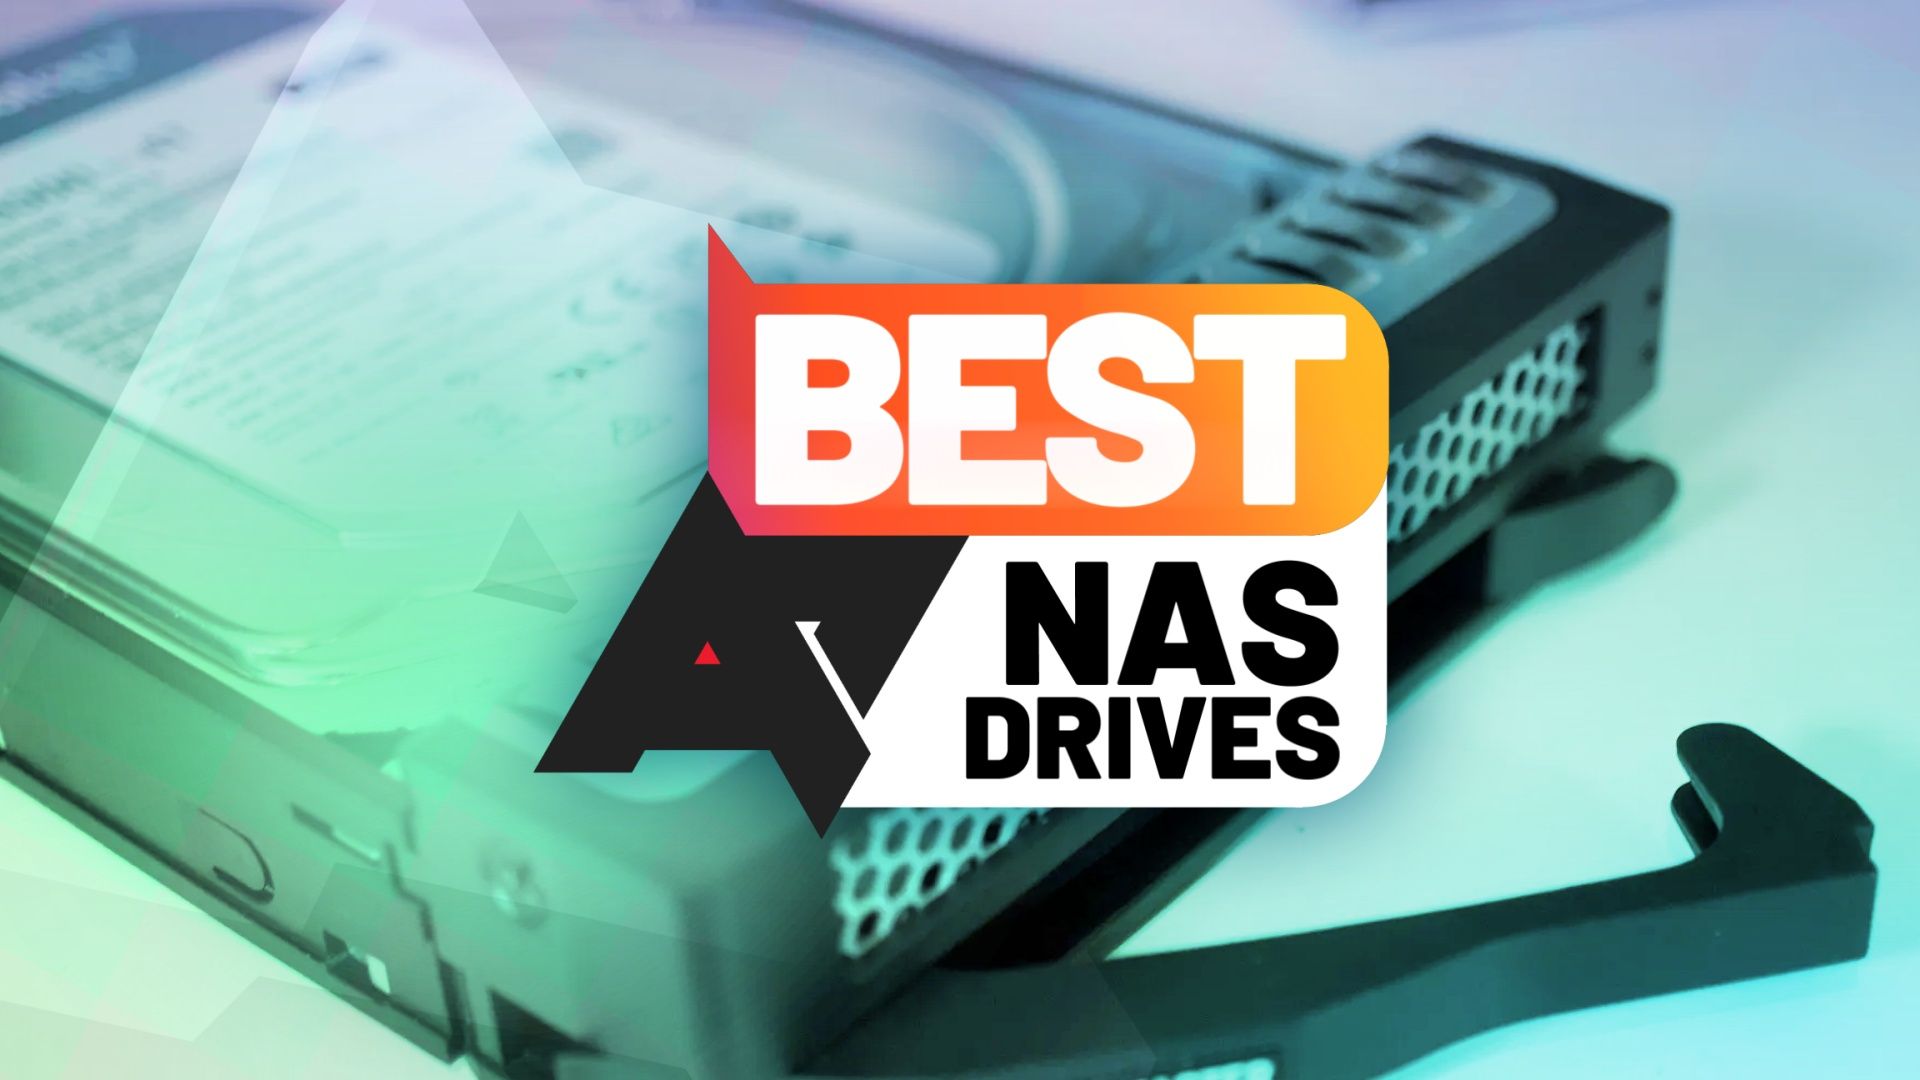 Image of a hard drive with a green tint and a 'Best NAS Drives' logo on top